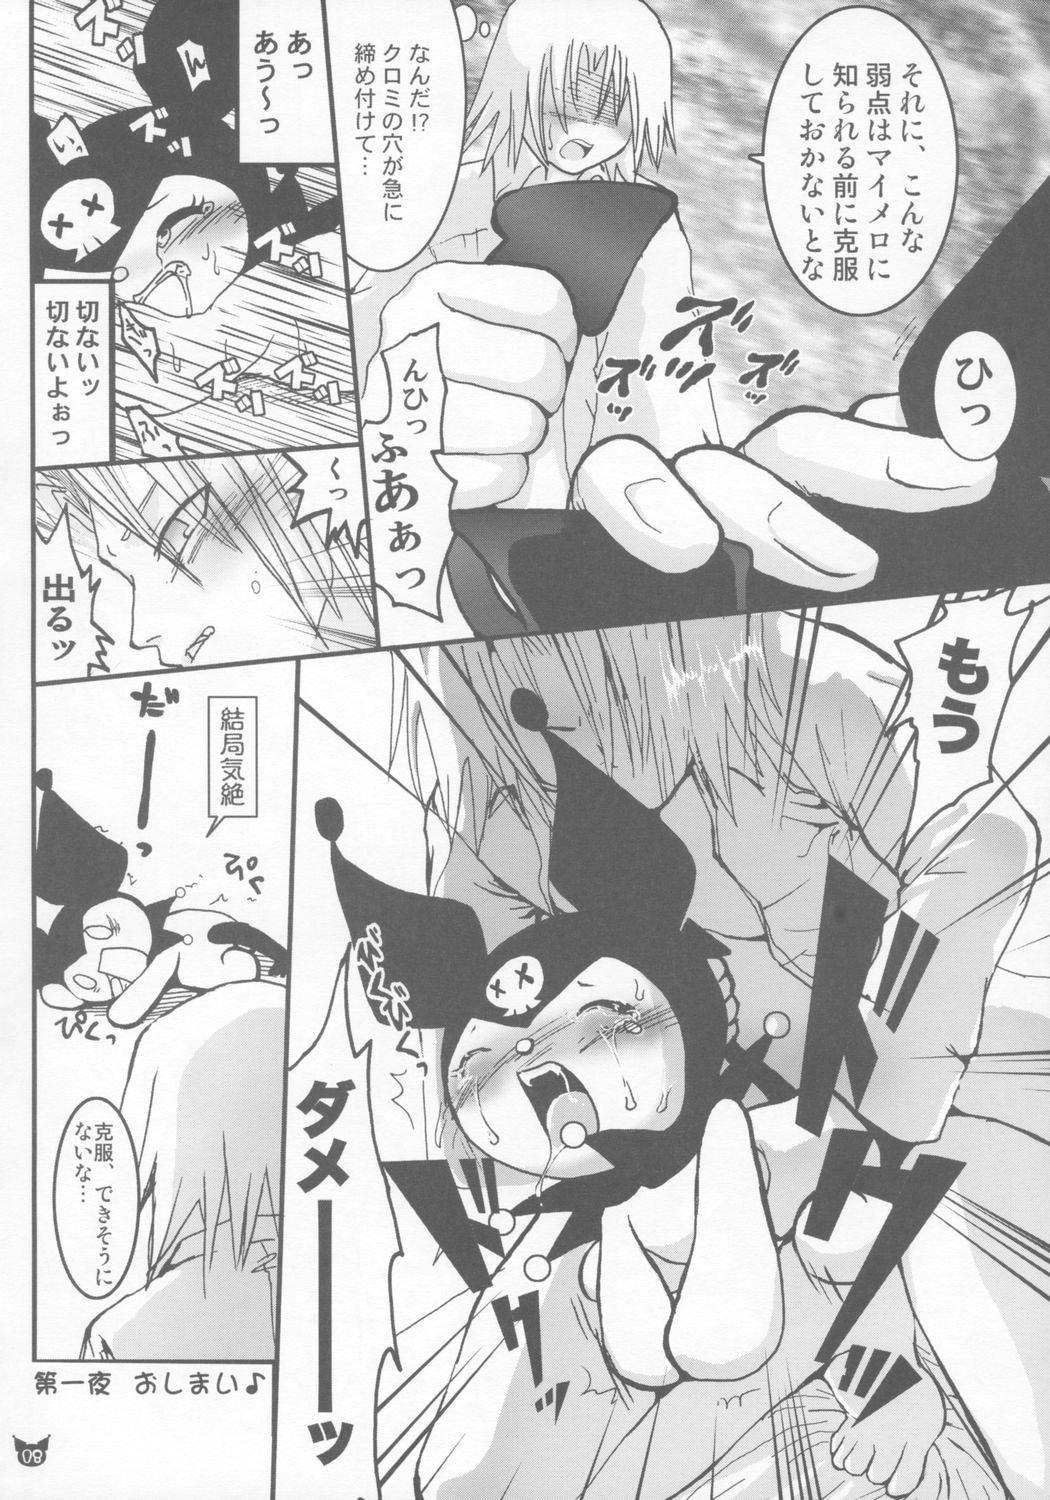 Rimming HYPER KUROMIX - Onegai my melody Pinoy - Page 7